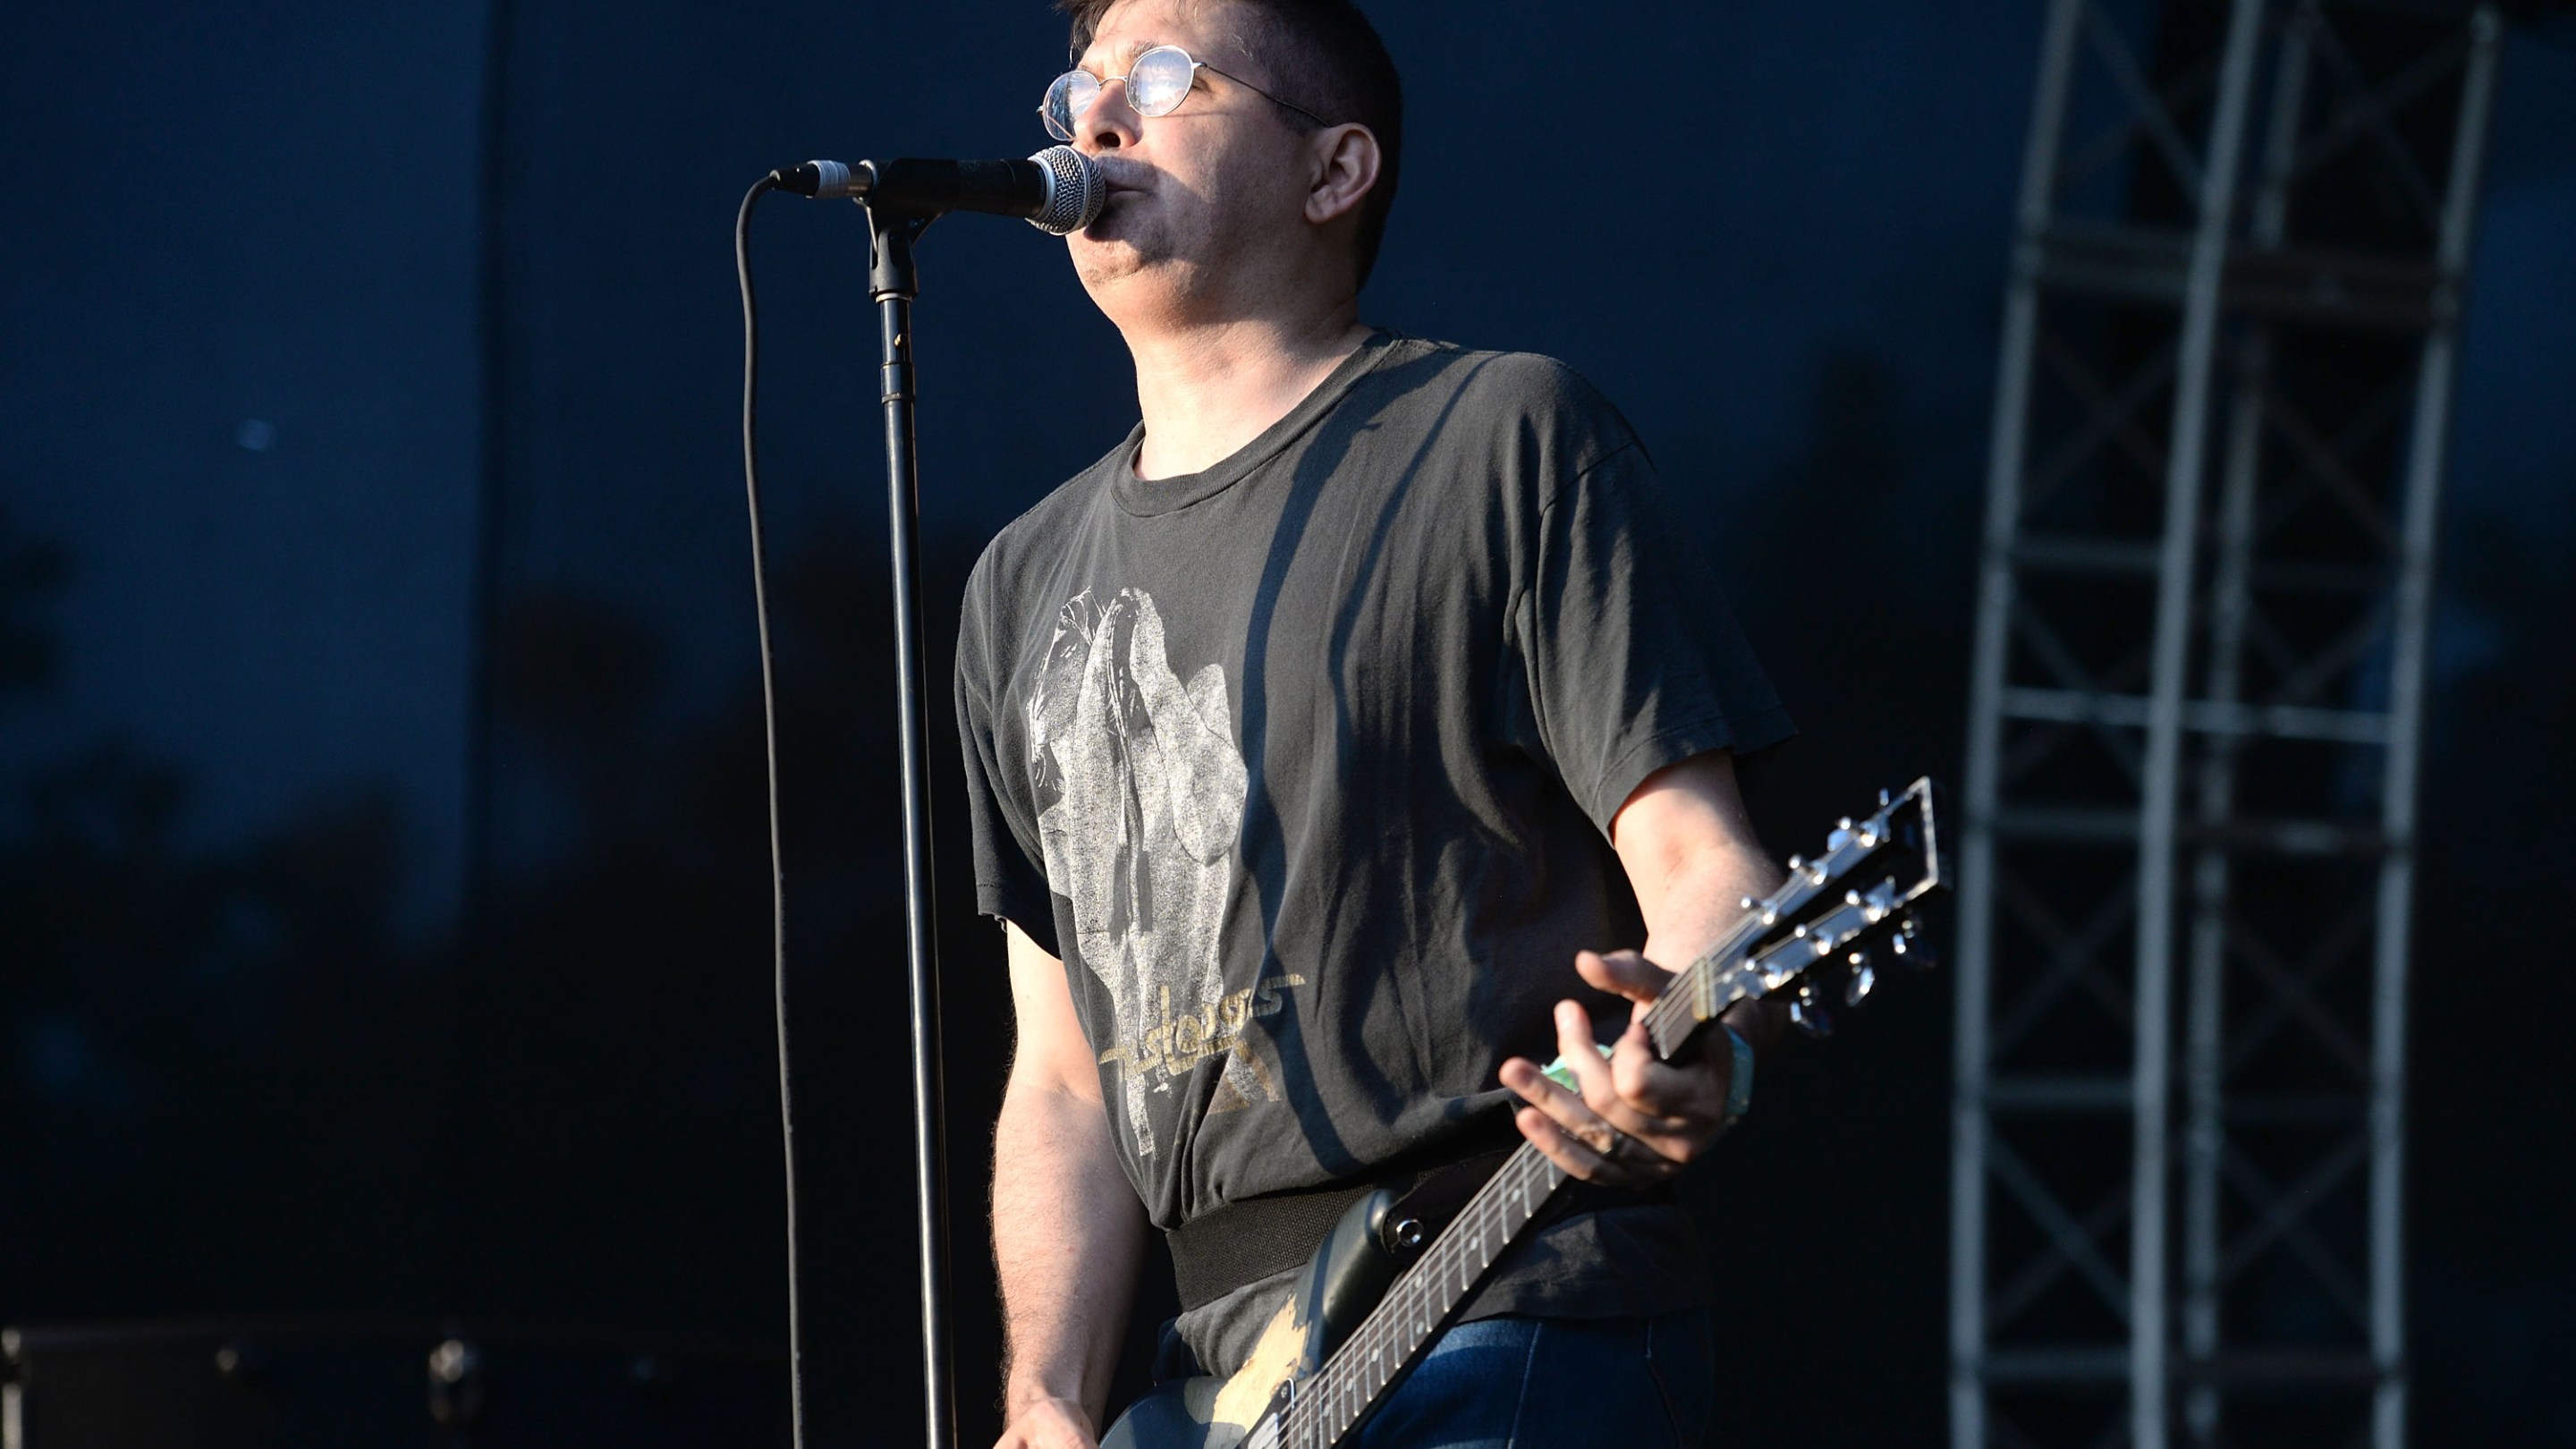 Steve Albini performs with his band Shellac at the FYF Fest in Los Angeles in 2016.